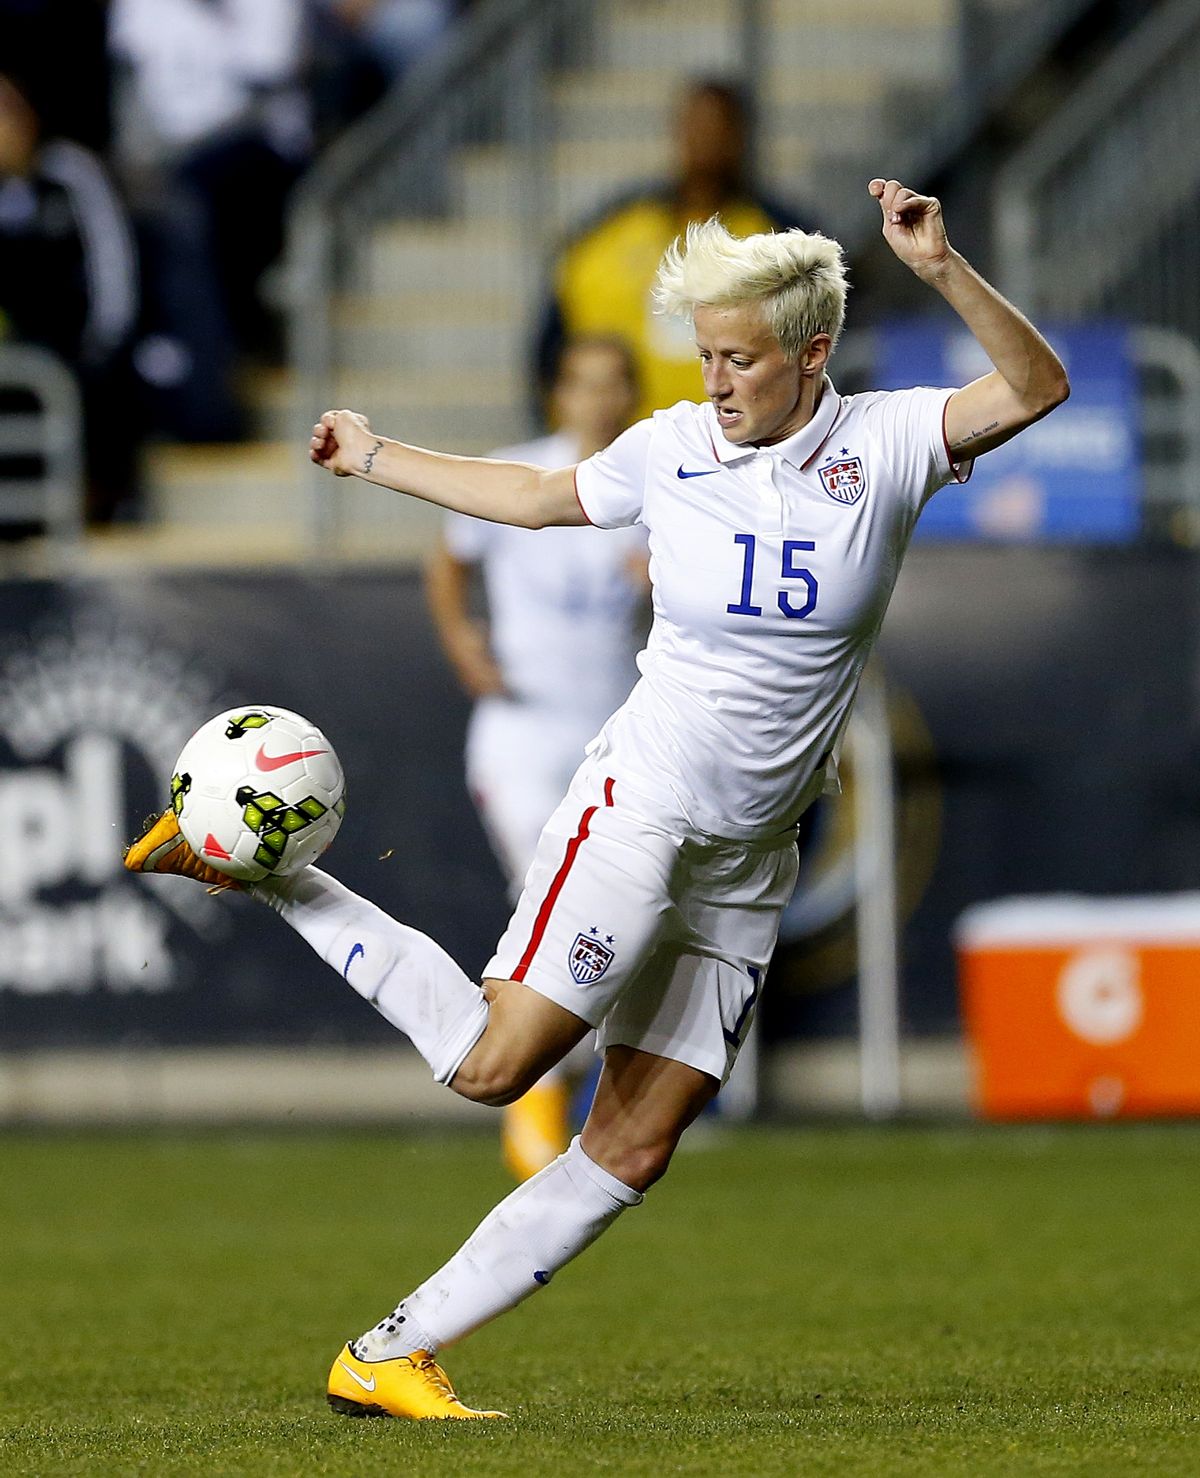 FILE - In this Oct. 24, 2014, file photo, United States midfielder Megan Rapinoe (15) against Mexico in the second half during a CONCACAF semifinal soccer match in Chester, Pa. Five players from the World Cup-winning U.S. national team have accused the U.S. Soccer Federation of wage discrimination in an action filed with the Equal Employment Opportunity Commission. Alex Morgan, Carli Lloyd, Megan Rapinoe, Becky Sauerbrunn and Hope Solo maintain in the EEOC filing they were payed nearly four times less than their male counterparts on the U.S. men's national team. The filing was announced in a press release on Thursday, March 31, 2016. (AP Photo/Rich Schultz, File) (AP)